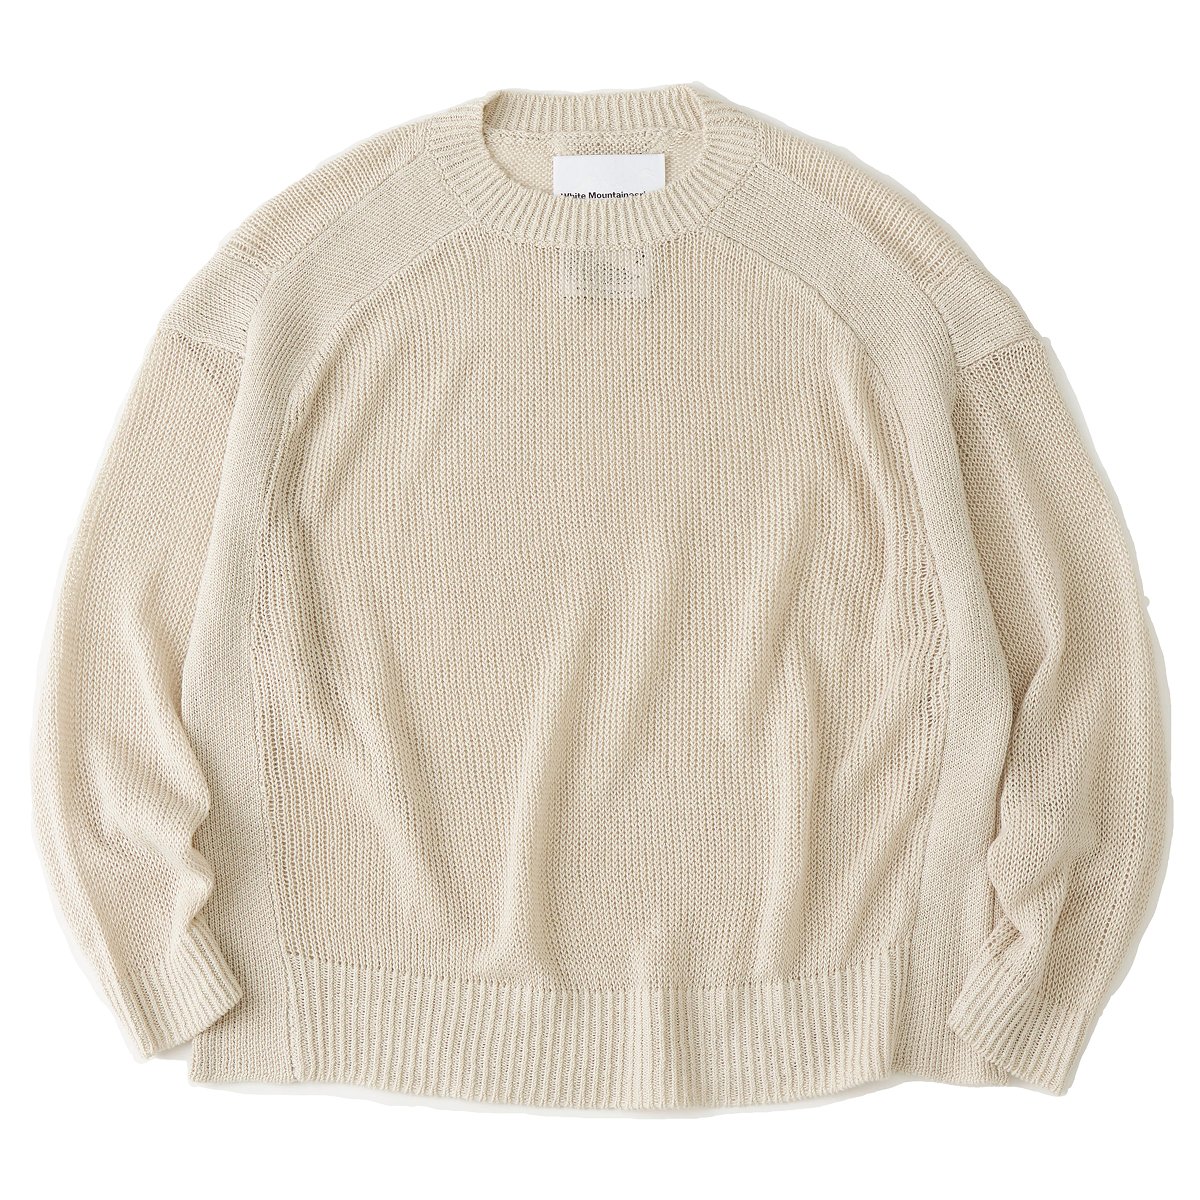 White Mountaineering<BR>LINEN KNIT PULLOVER(WHITE)